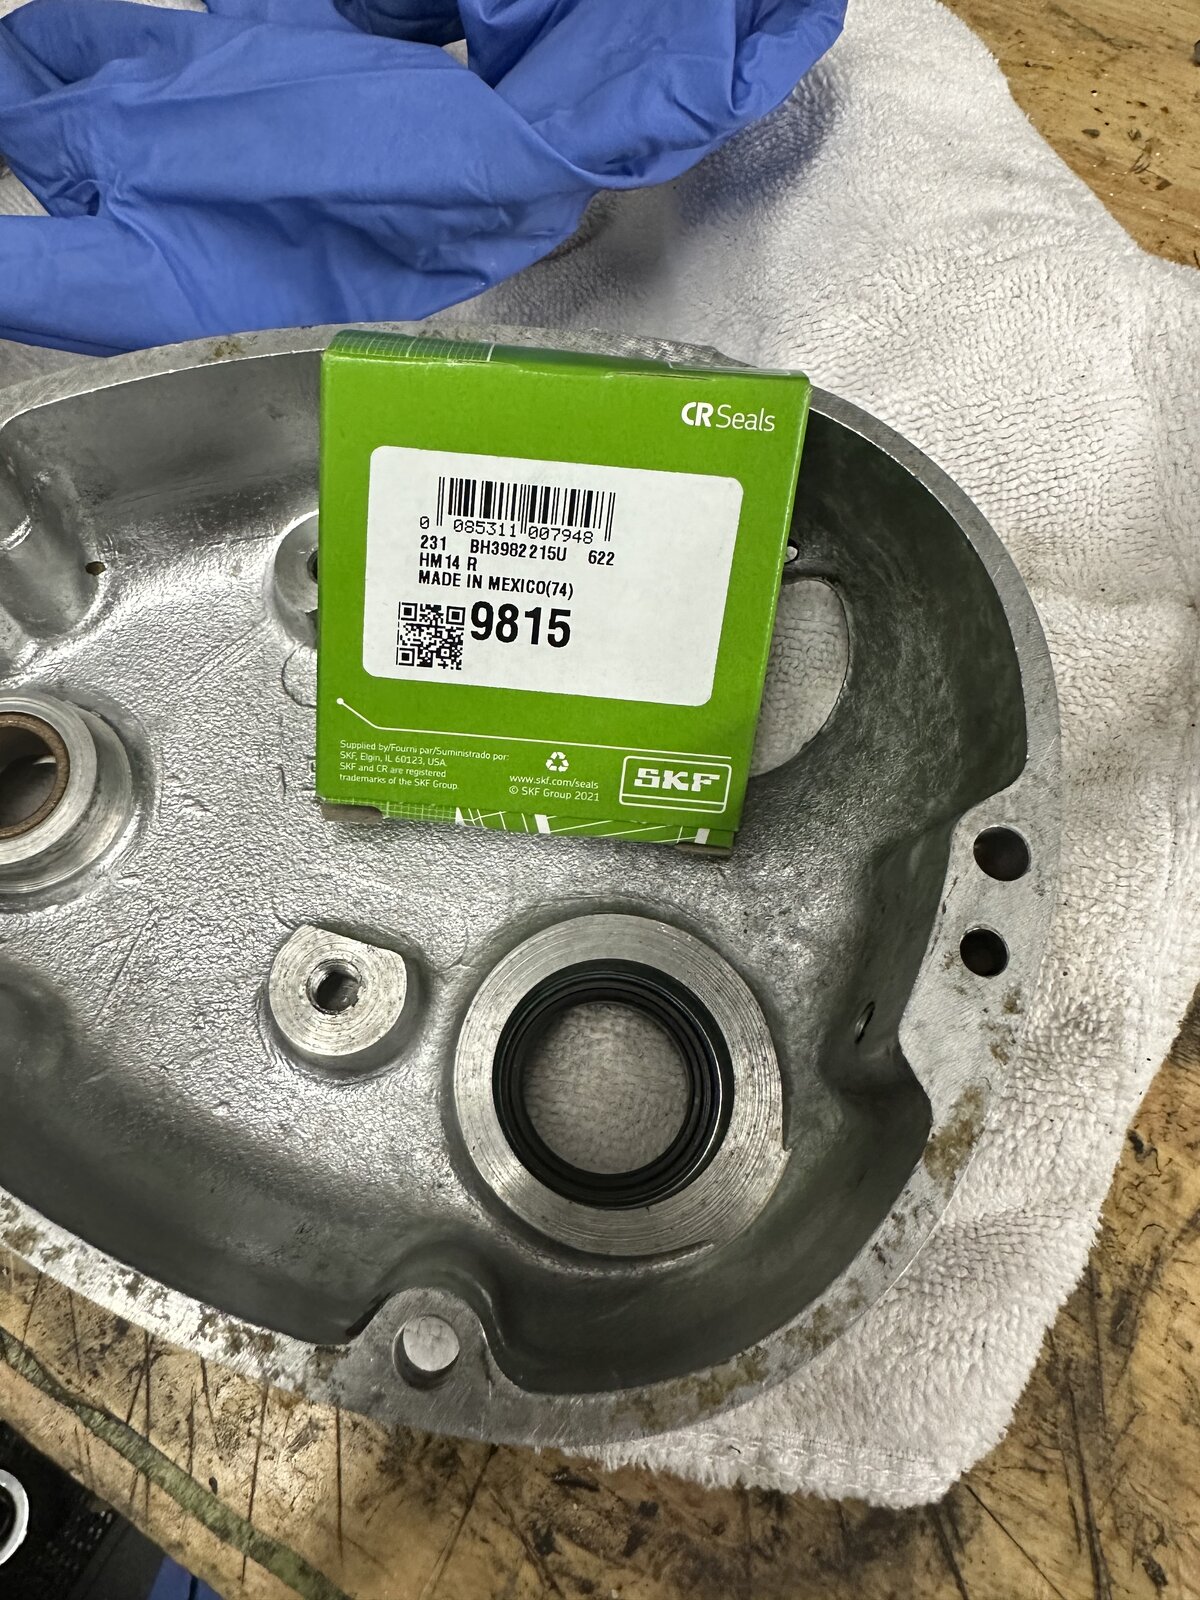 SKF 9815 in outer gearbox cover